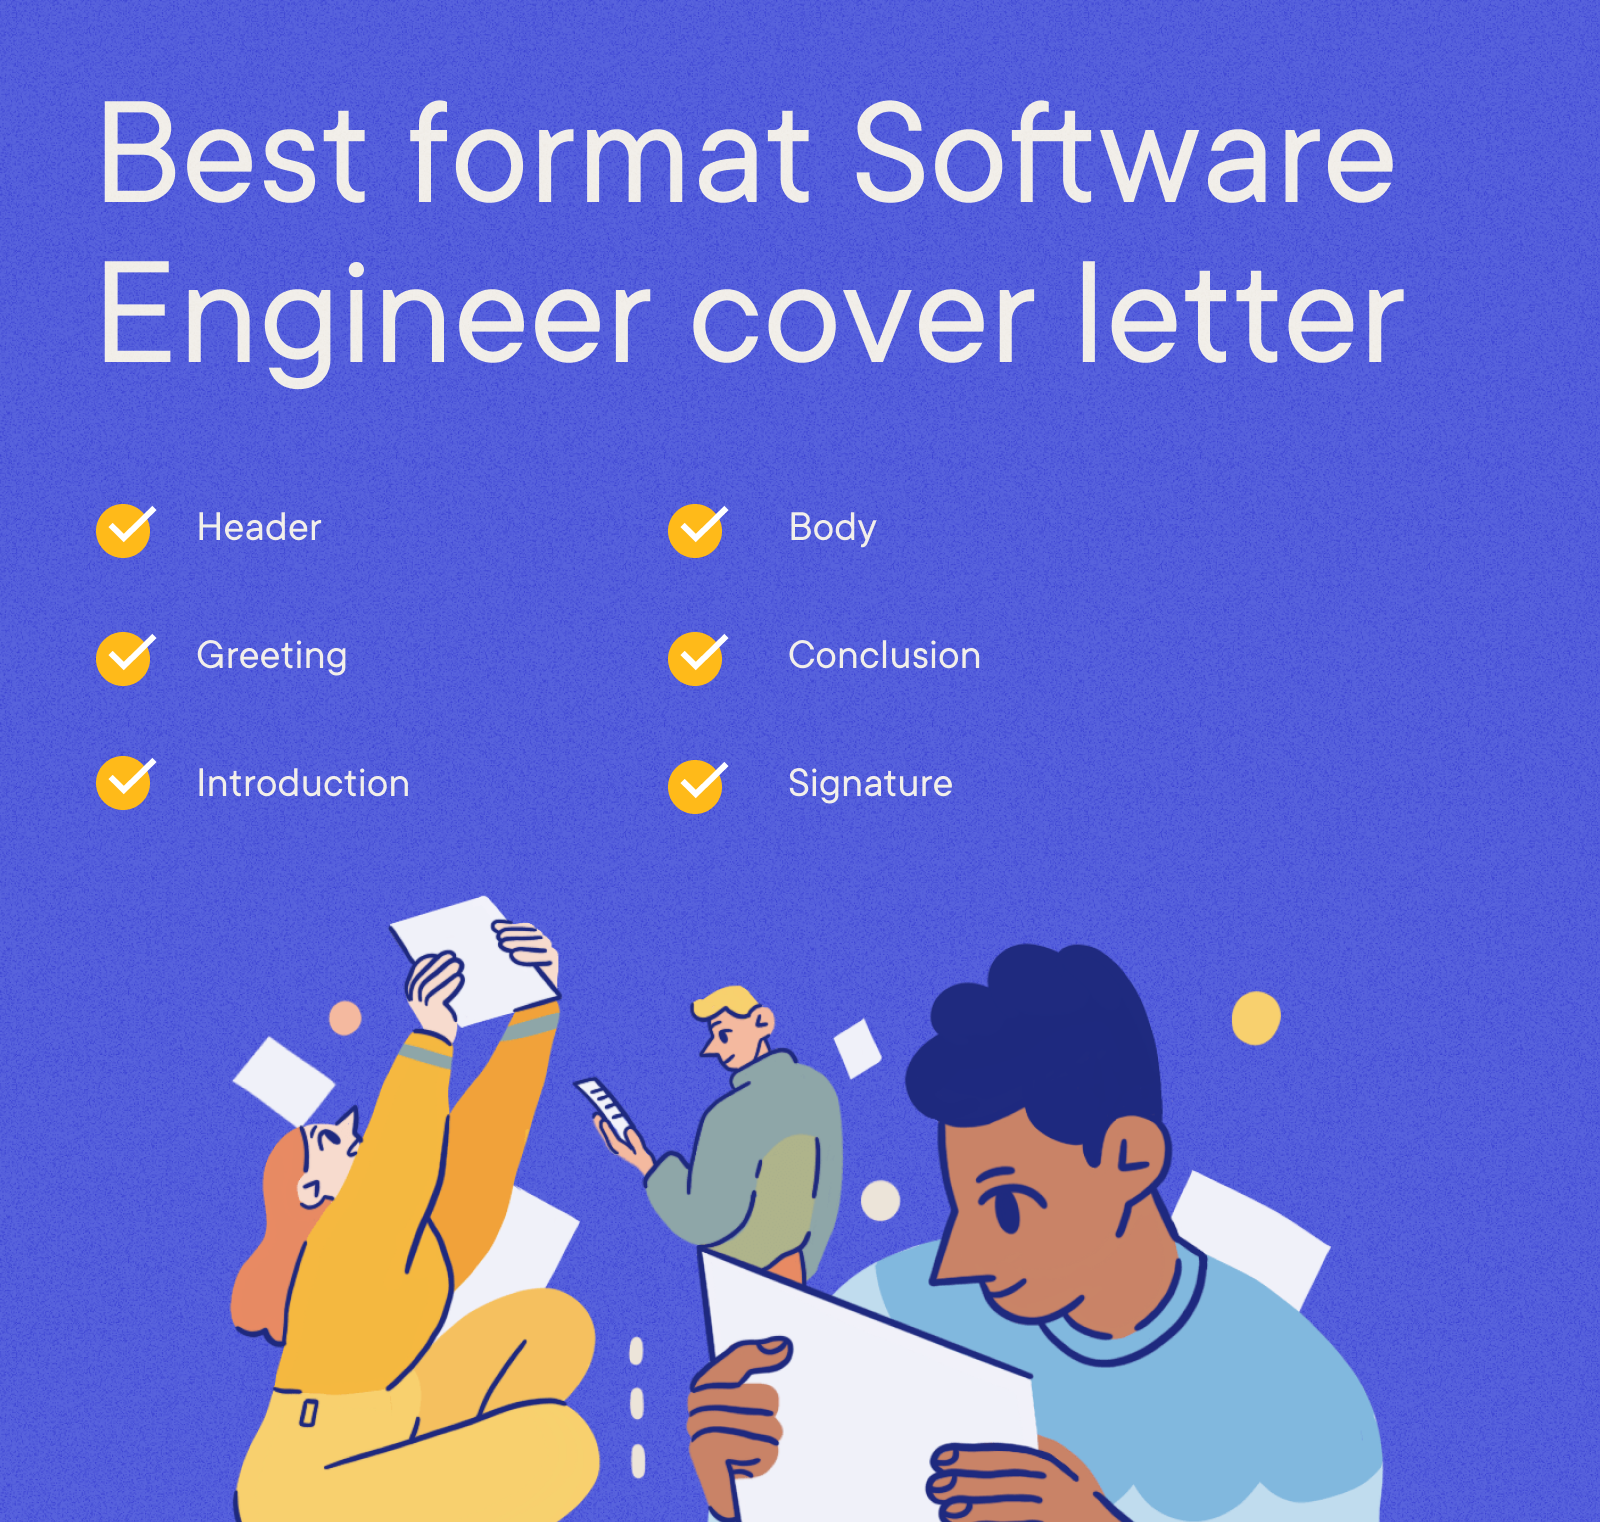 Software Engineer Cover Letter Example - Best format Software Engineer cover letter